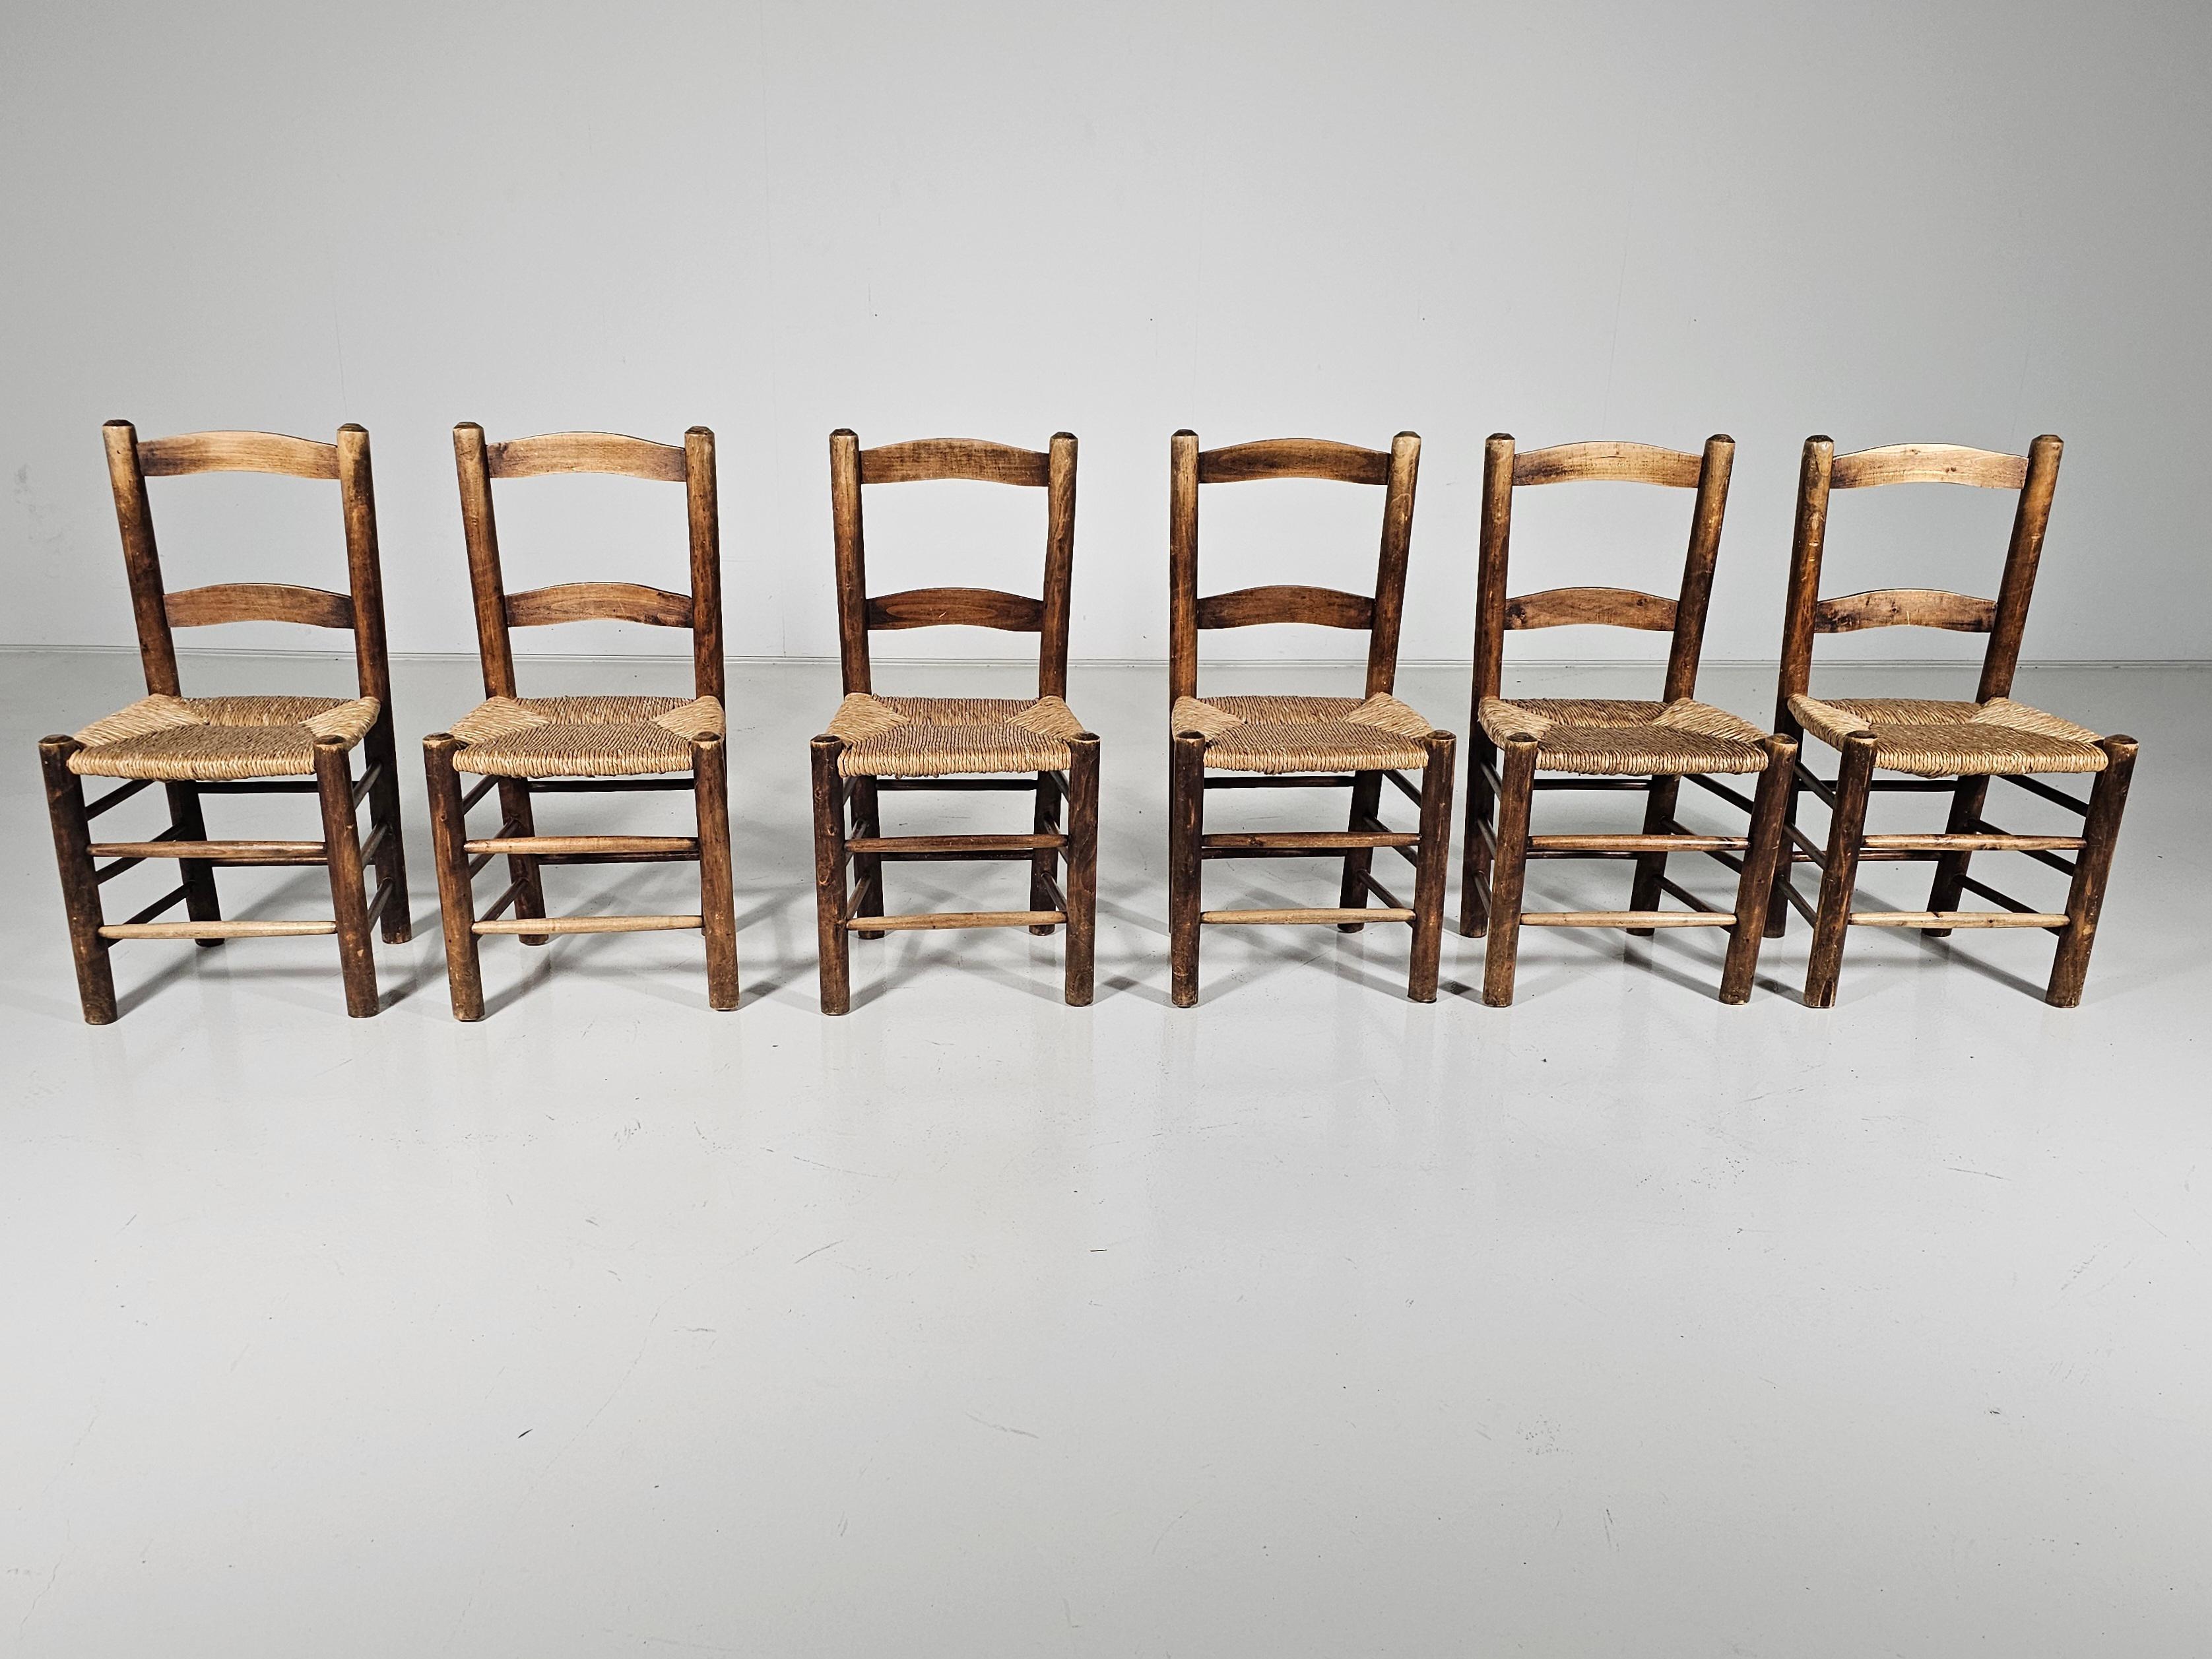 Set of 6 rustic farmer-style dining chairs made of oak with woven rush seats. made in Spain in the 1970s. The oak frames are in the original light-stained finish. The rush seats are original and in good condition.
 